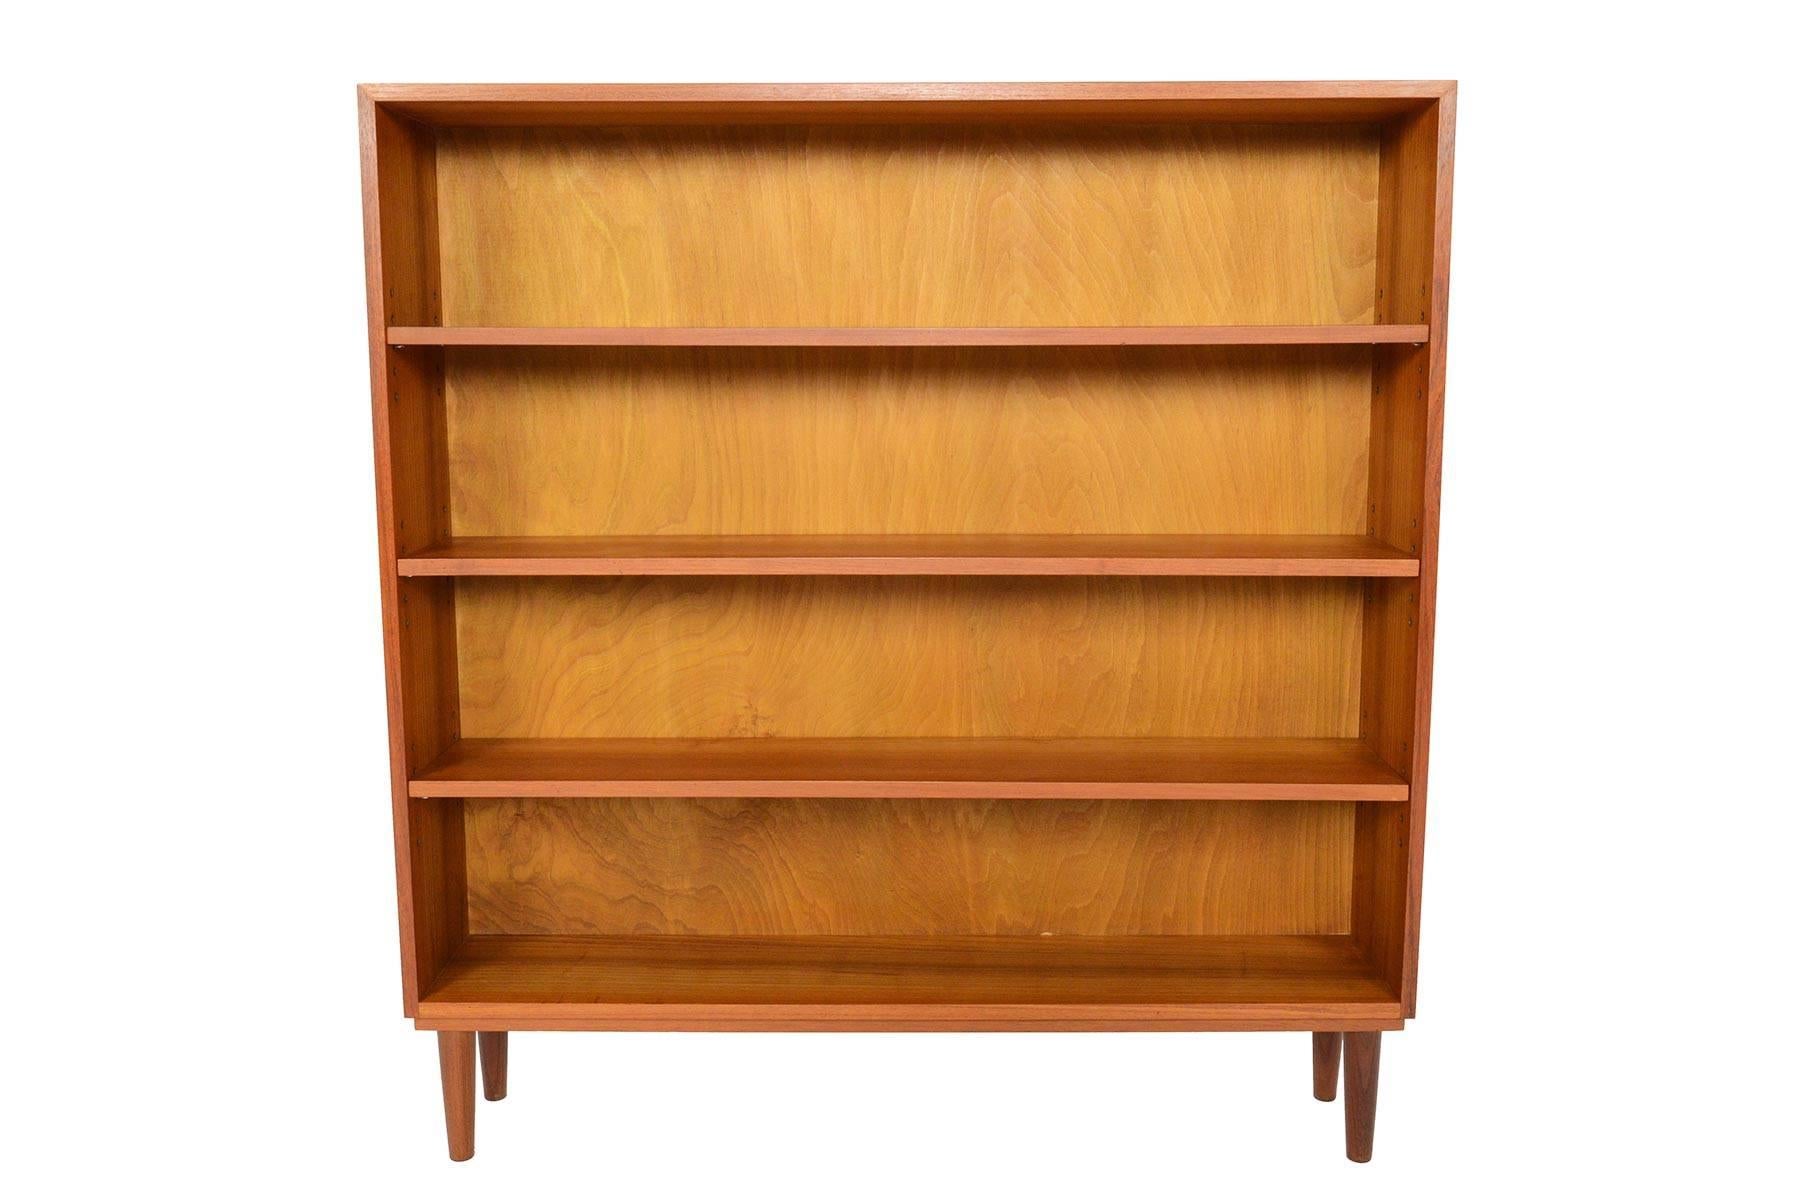 This gorgeous Danish modern midcentury bookcase in teak is the perfect storage piece for any modern home. Three adjustable shelves provide plenty of variation for all storage needs, and the extra narrow depth creates versatility for this piece to be